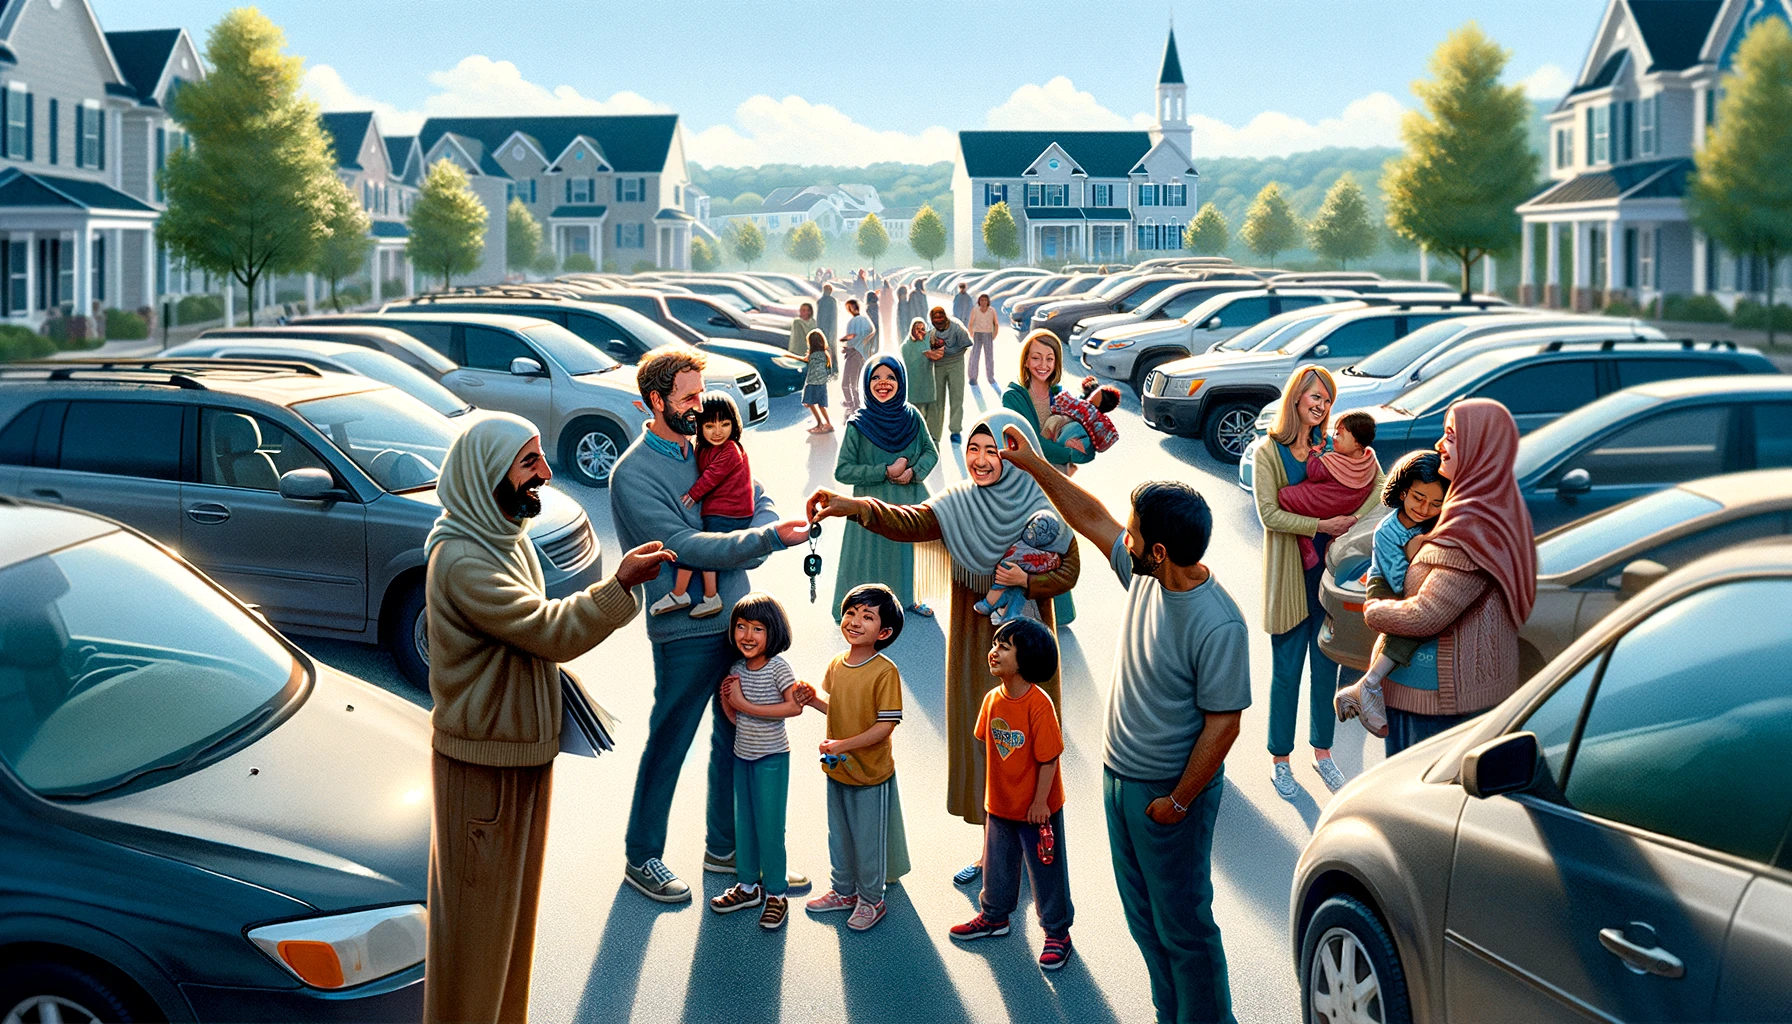 A diverse group of refugees joyfully receiving car keys from volunteers in a community parking lot in Reston, Virginia, symbolizing new opportunities and beginnings.